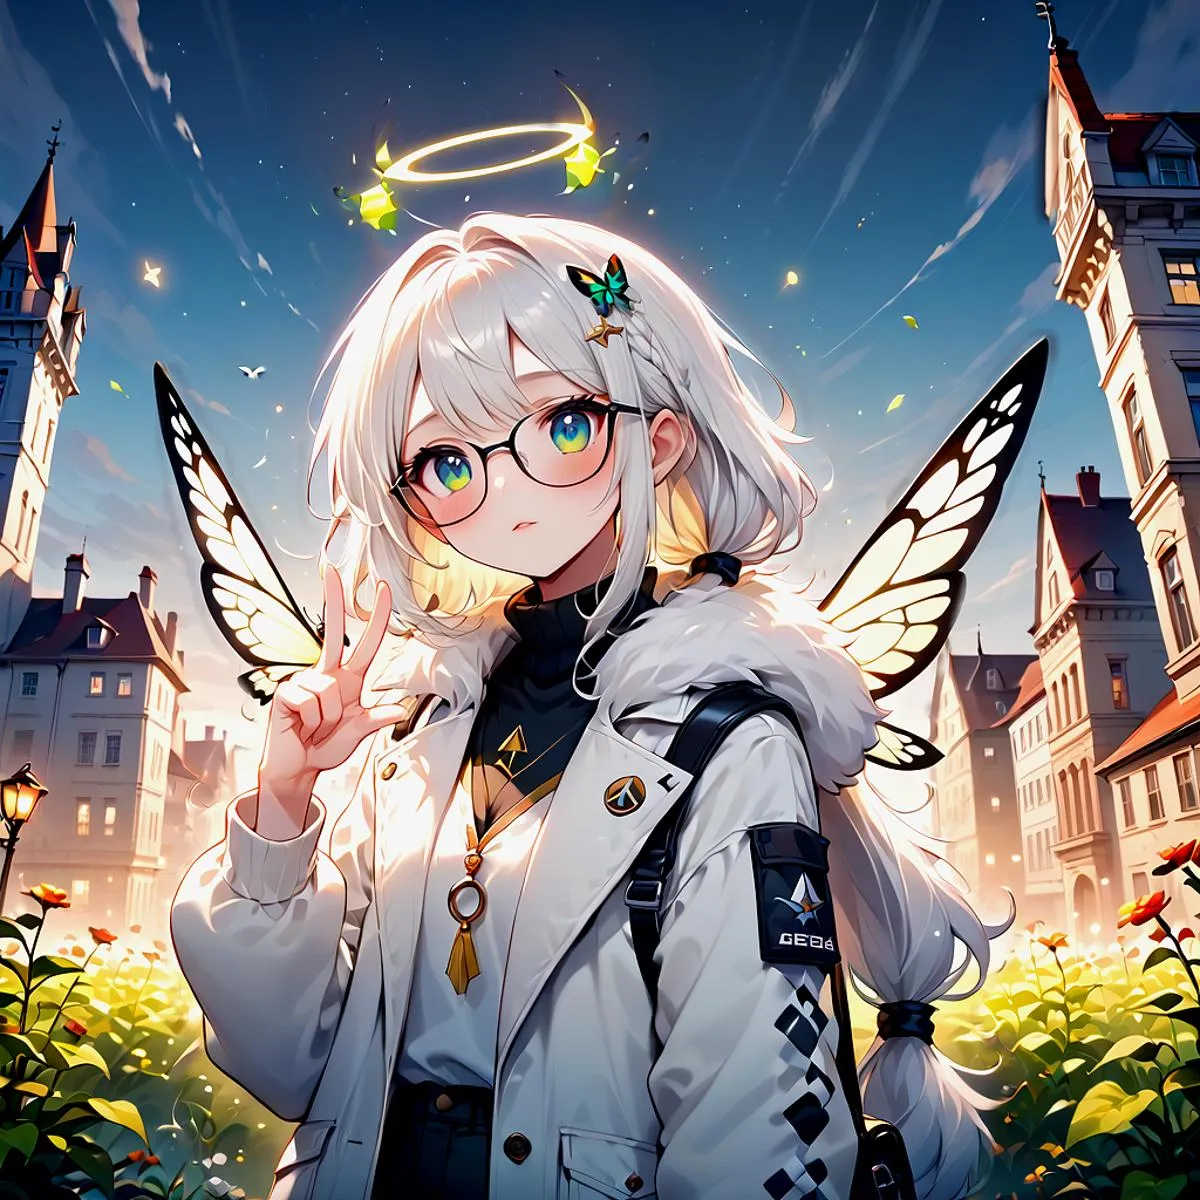 AI generated image of an anime-style girl with fairy wings, a halo, and glasses. She is wearing a white jacket and standing in a charming village landscape. Created using stable diffusion.